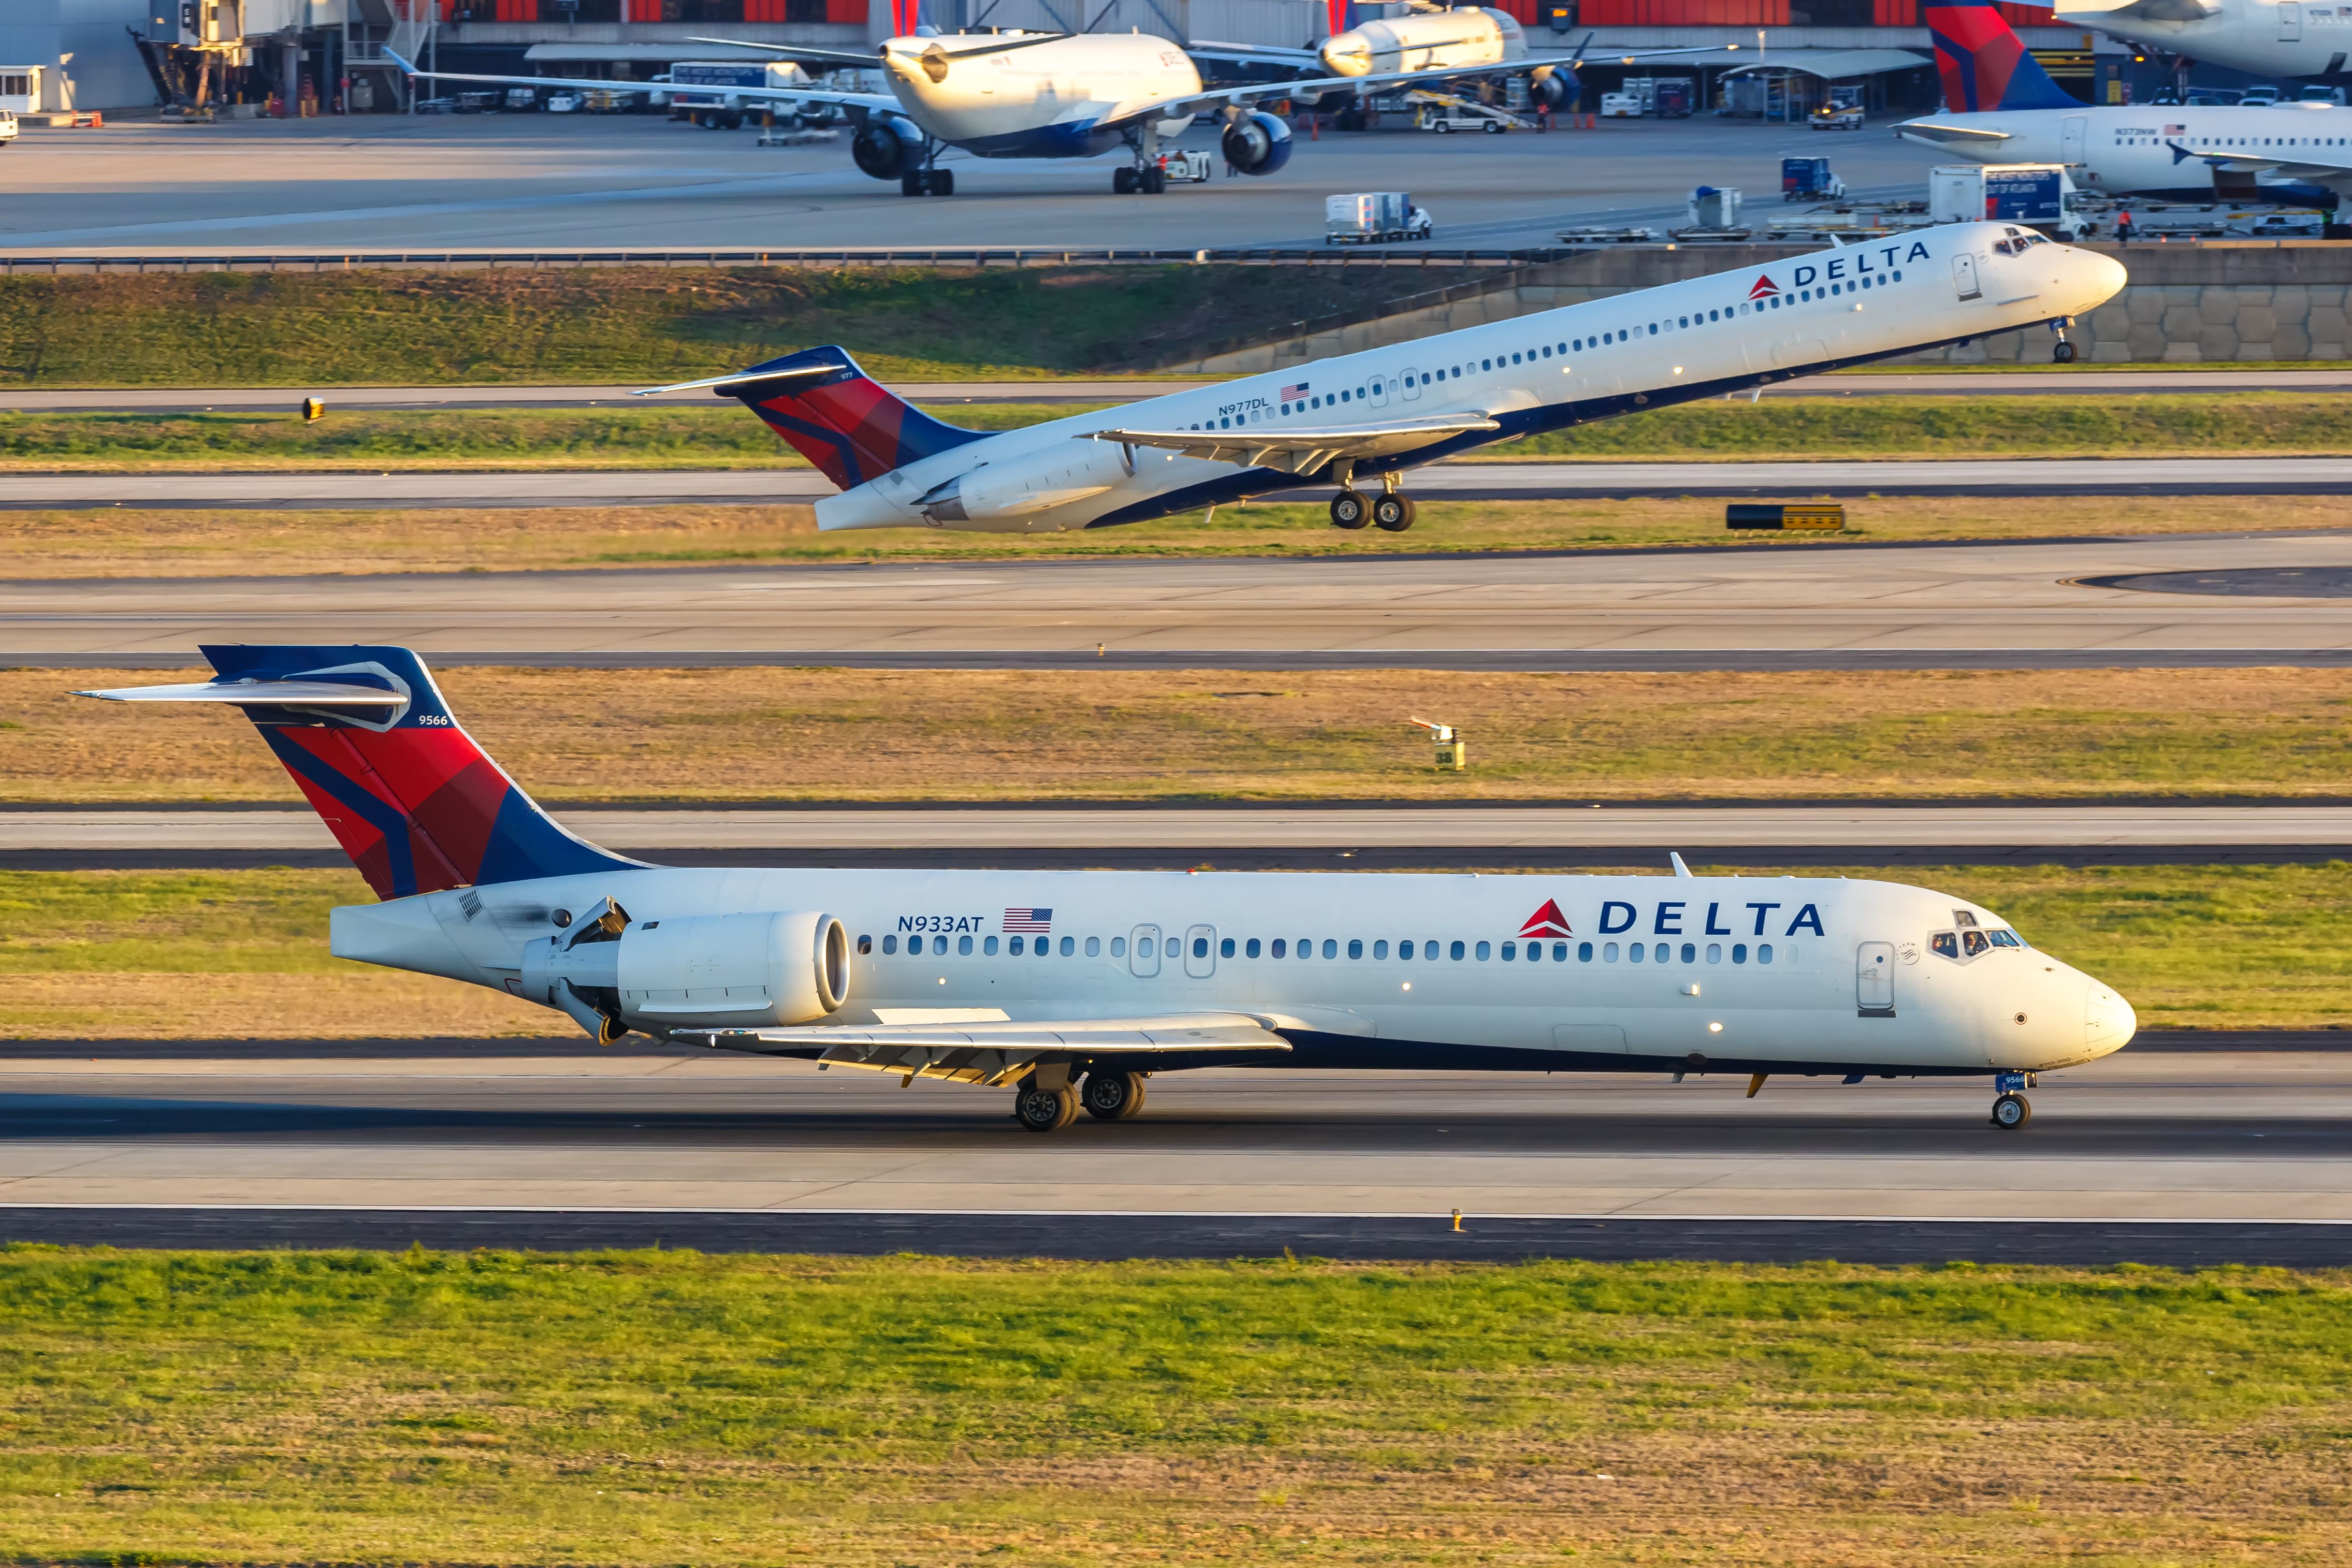 A Delta Air Lines Boeing 717 on a taxiway, as another Delta Air Lines aircraft takes off in the background.